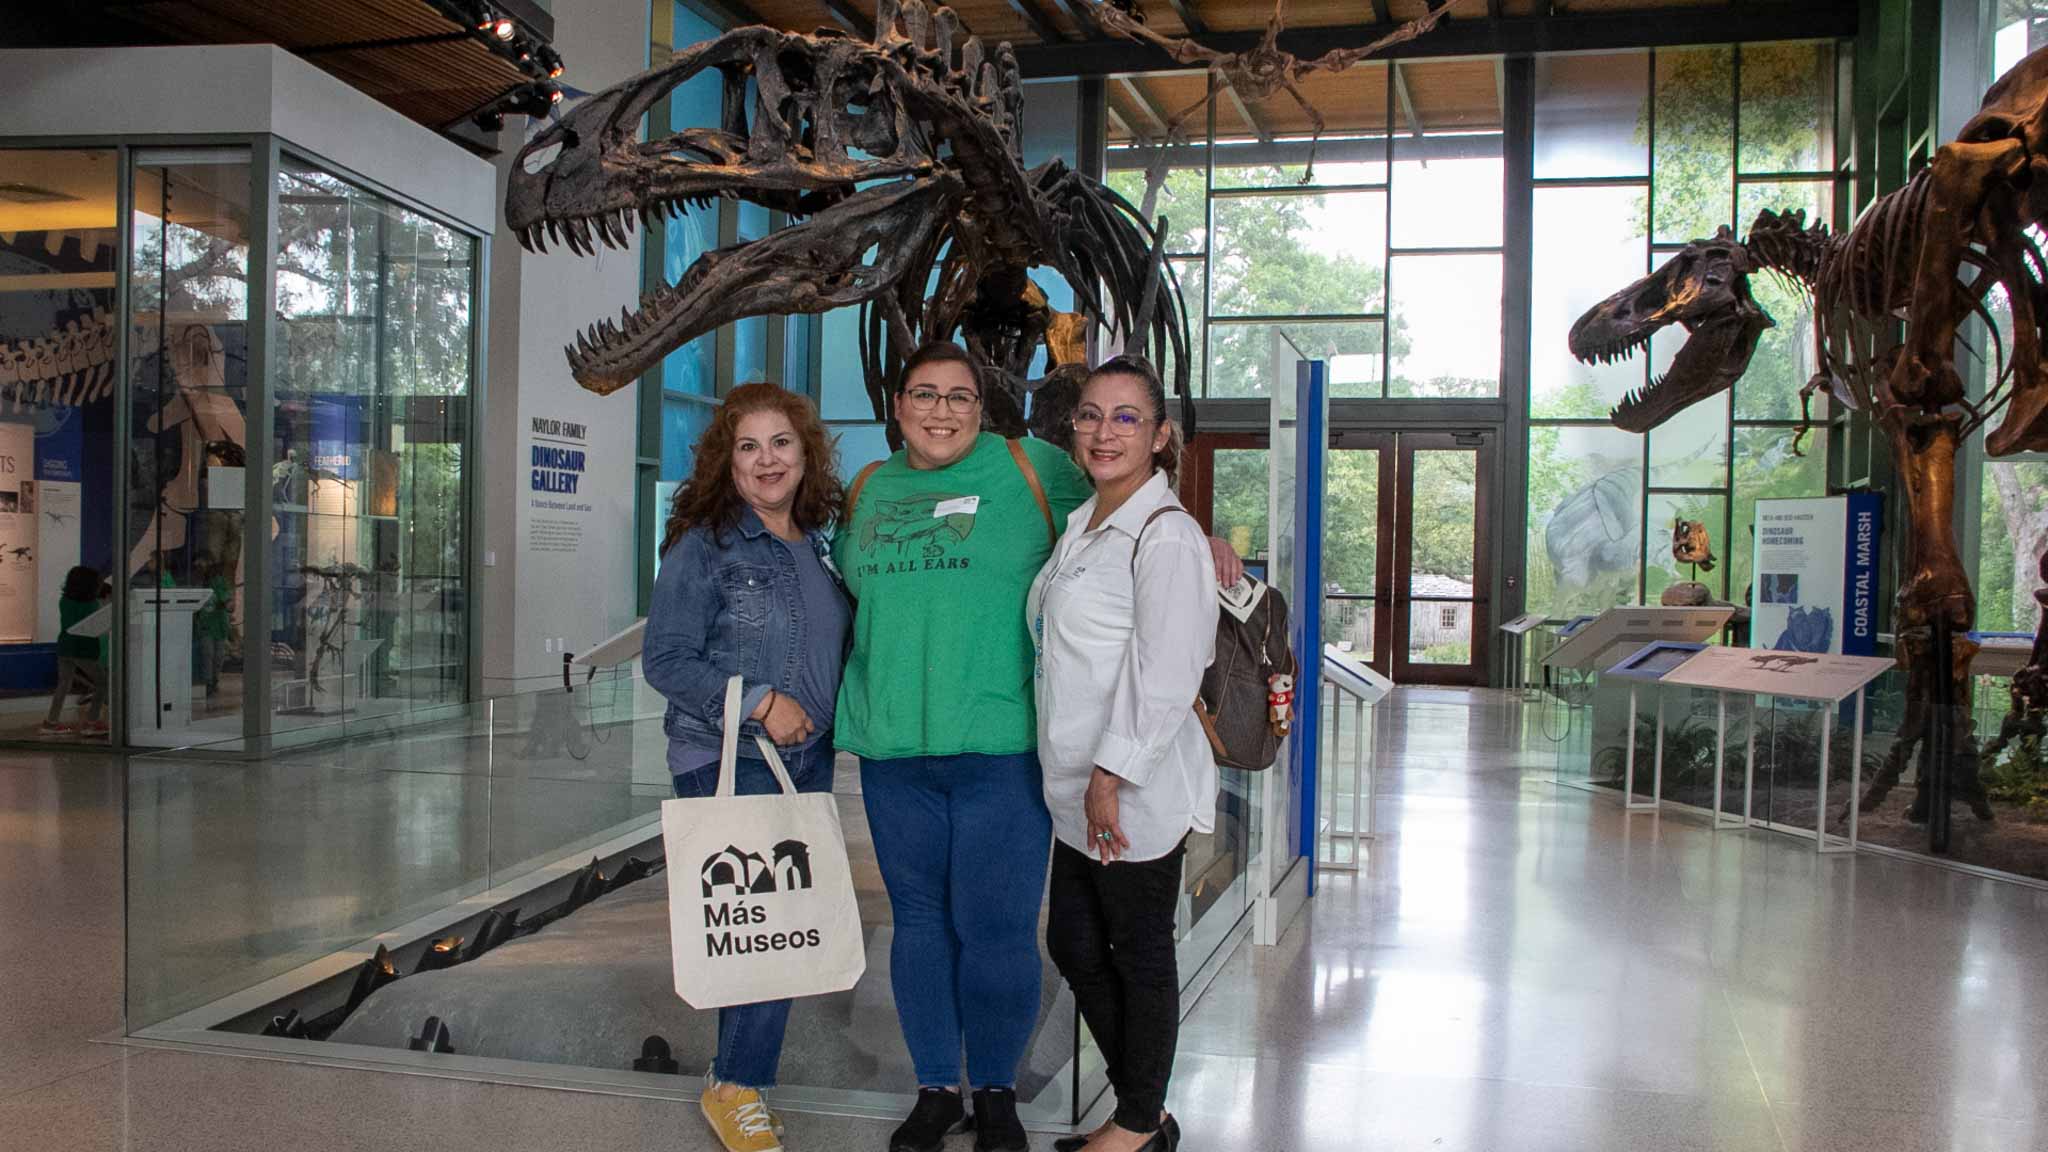 3 female educators standing in front of a dinosaur fossil, smiling. One holds a "mas museos" tote bag.